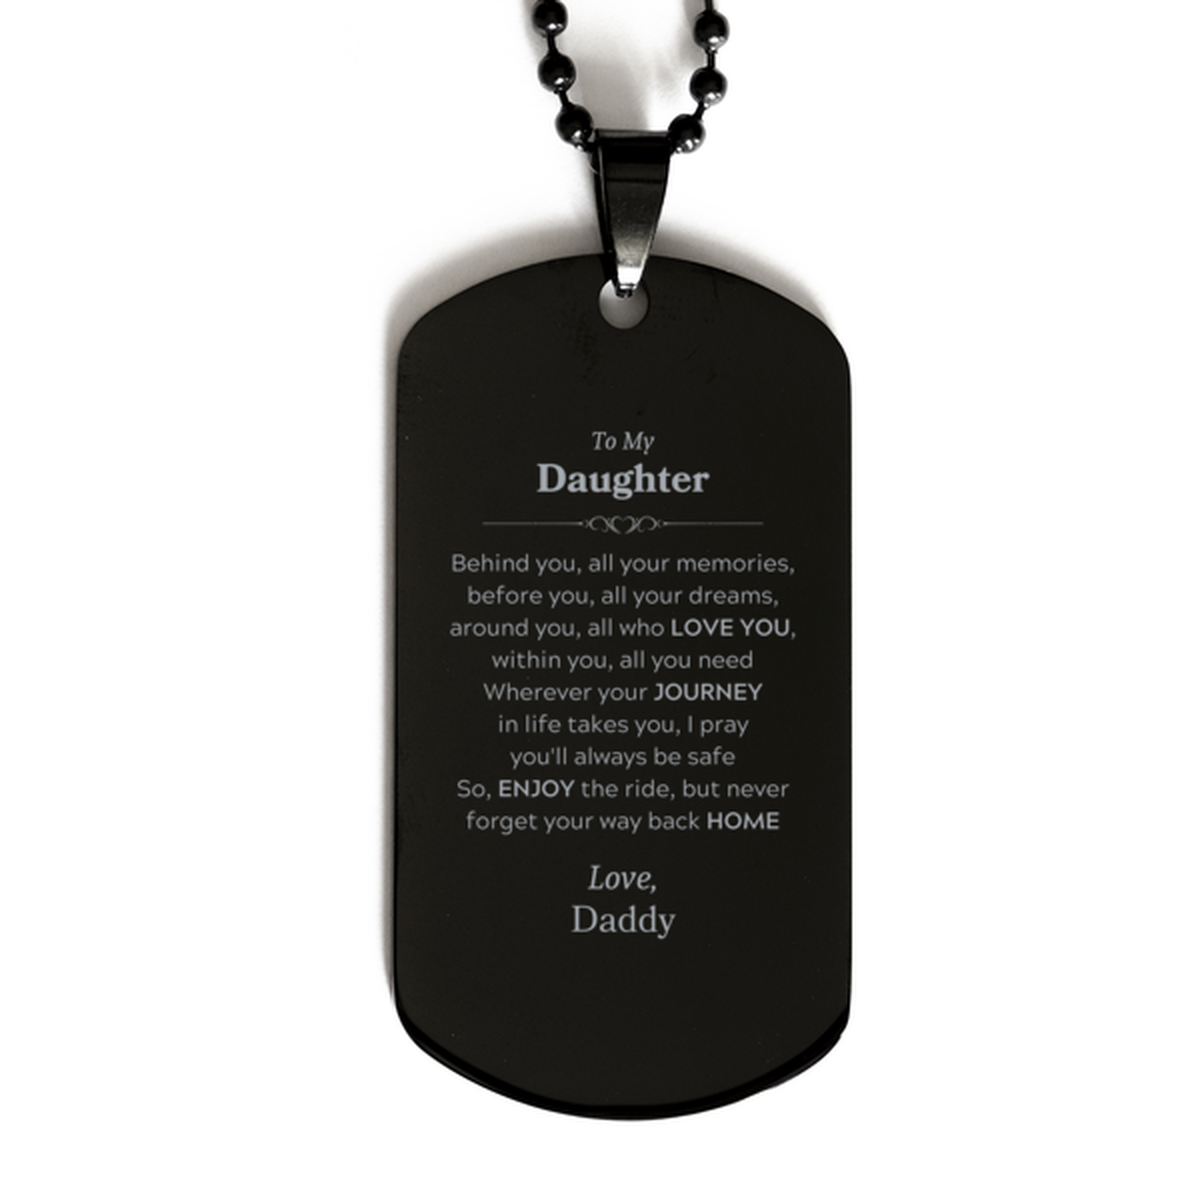 To My Daughter Graduation Gifts from Daddy, Daughter Black Dog Tag Christmas Birthday Gifts for Daughter Behind you, all your memories, before you, all your dreams. Love, Daddy